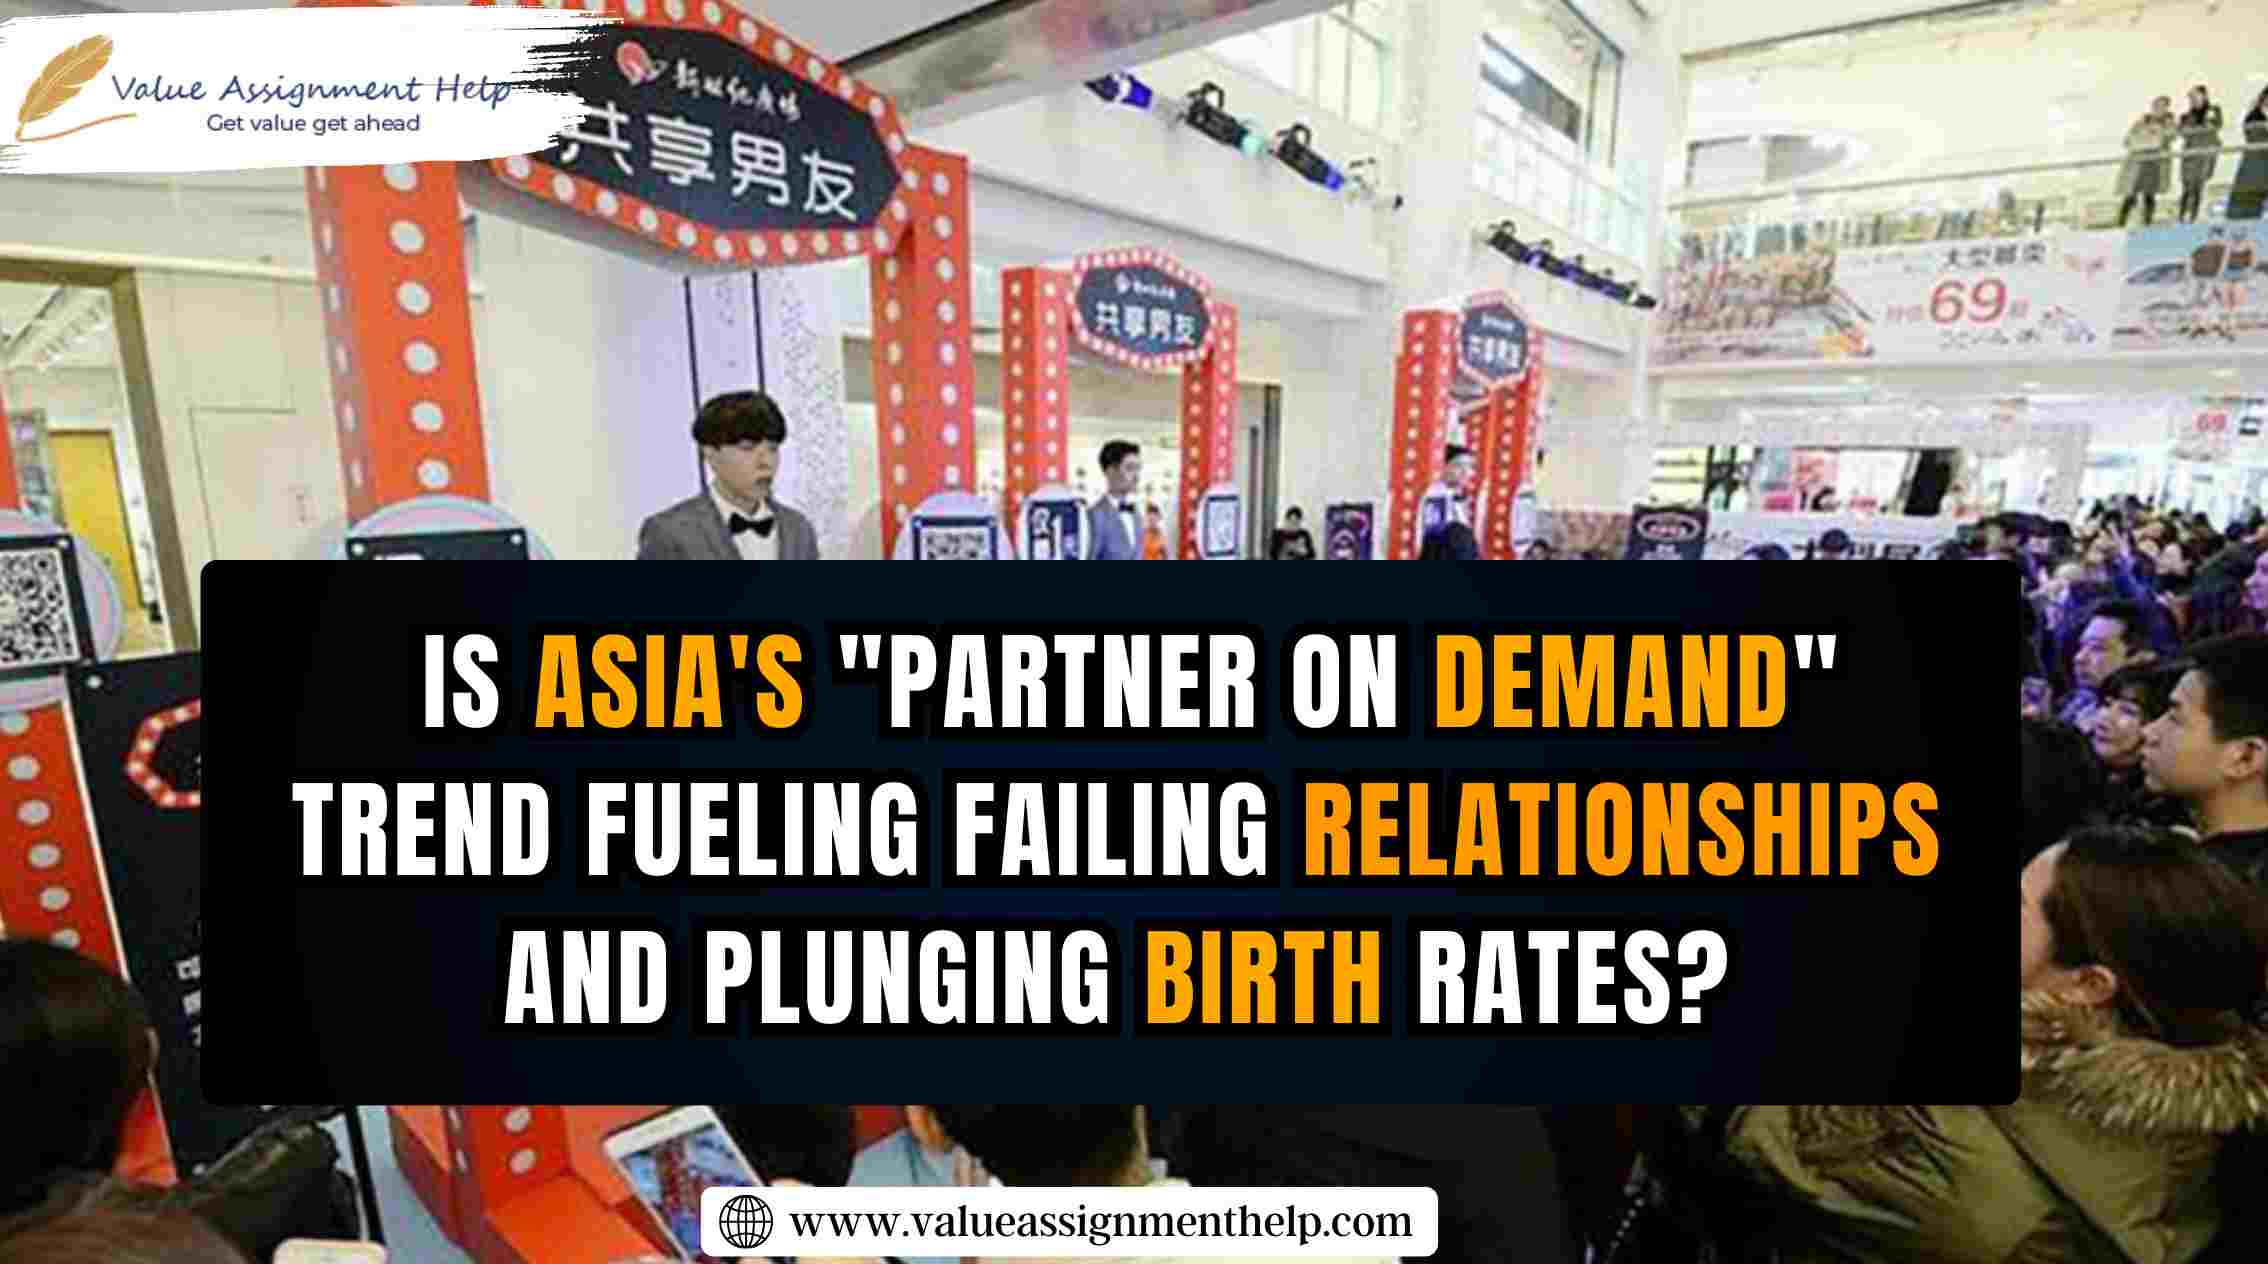  Is Asia's "partner on demand" trend fueling failing relationships and plunging birth rates?